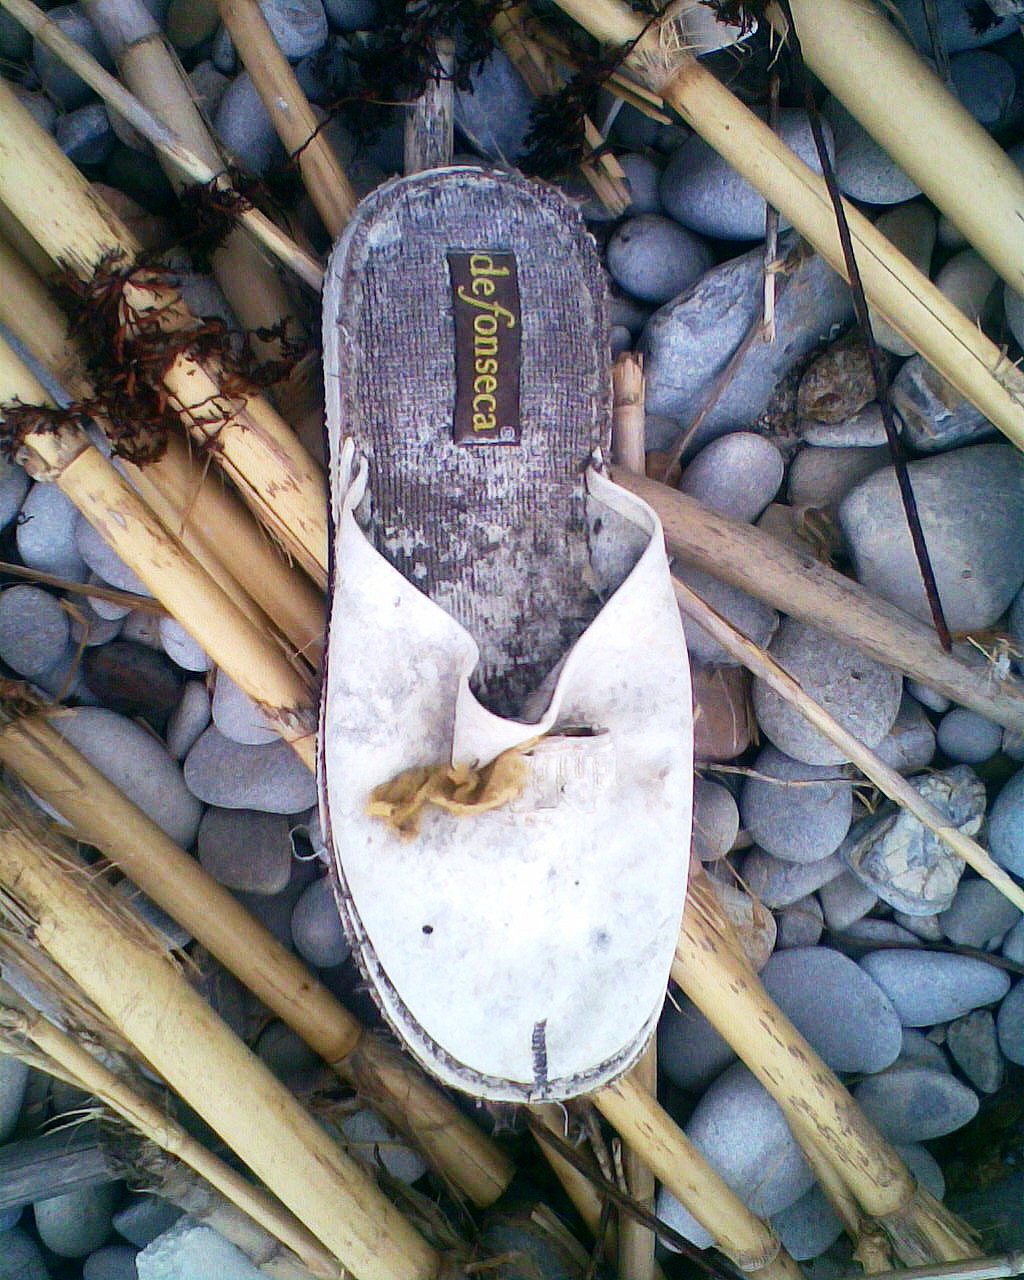 the worn shoe is on the rocks among the tall grasses